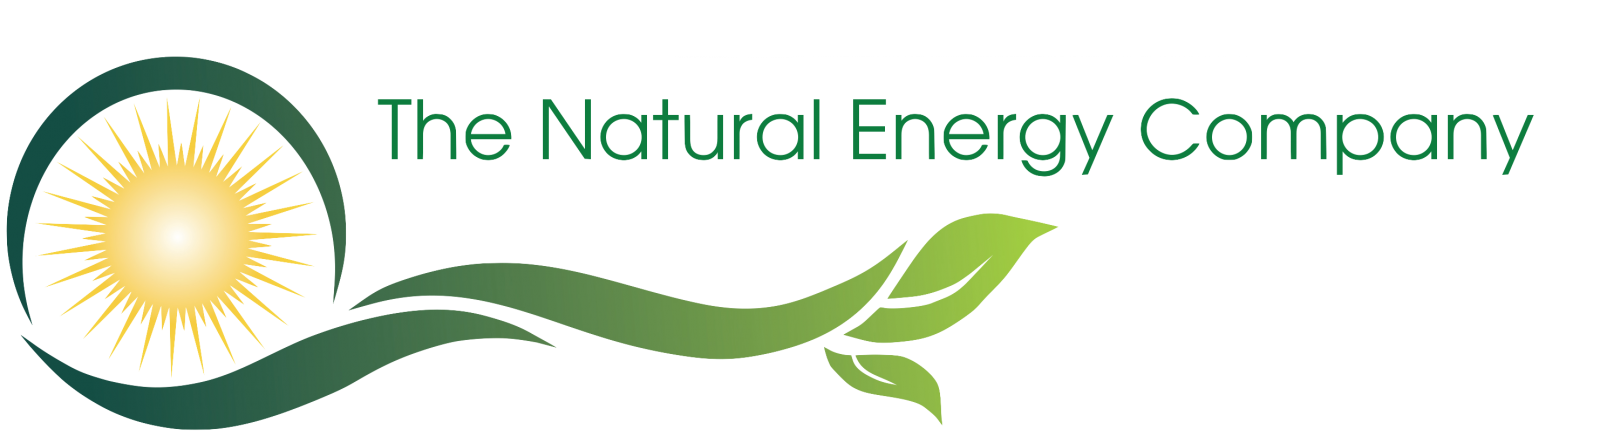 The Natural Energy Company | Home